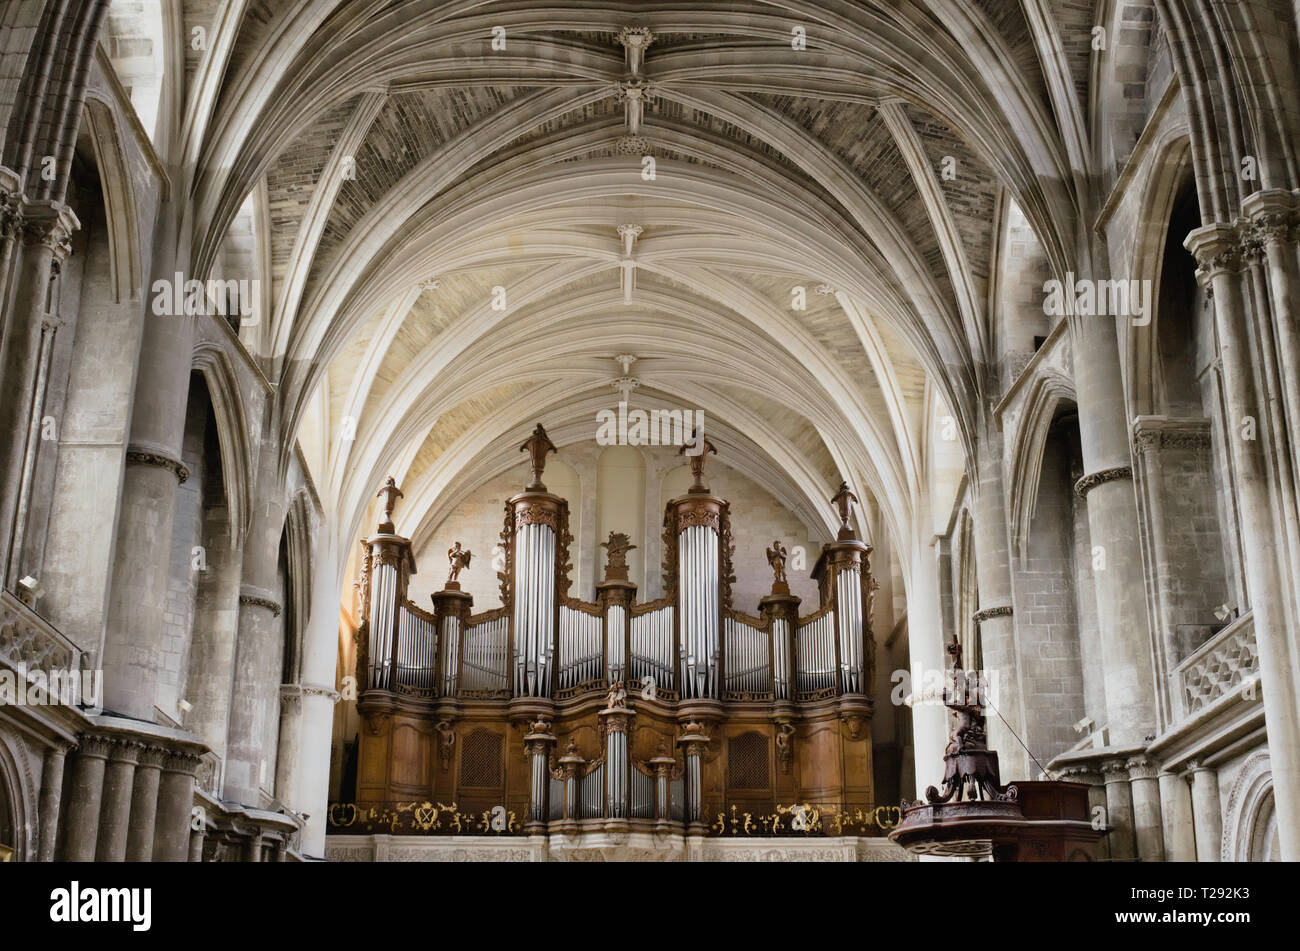 Great organ and architecture within the Gothic Cathedral of Saint-andré, Bordeaux, France Stock Photo